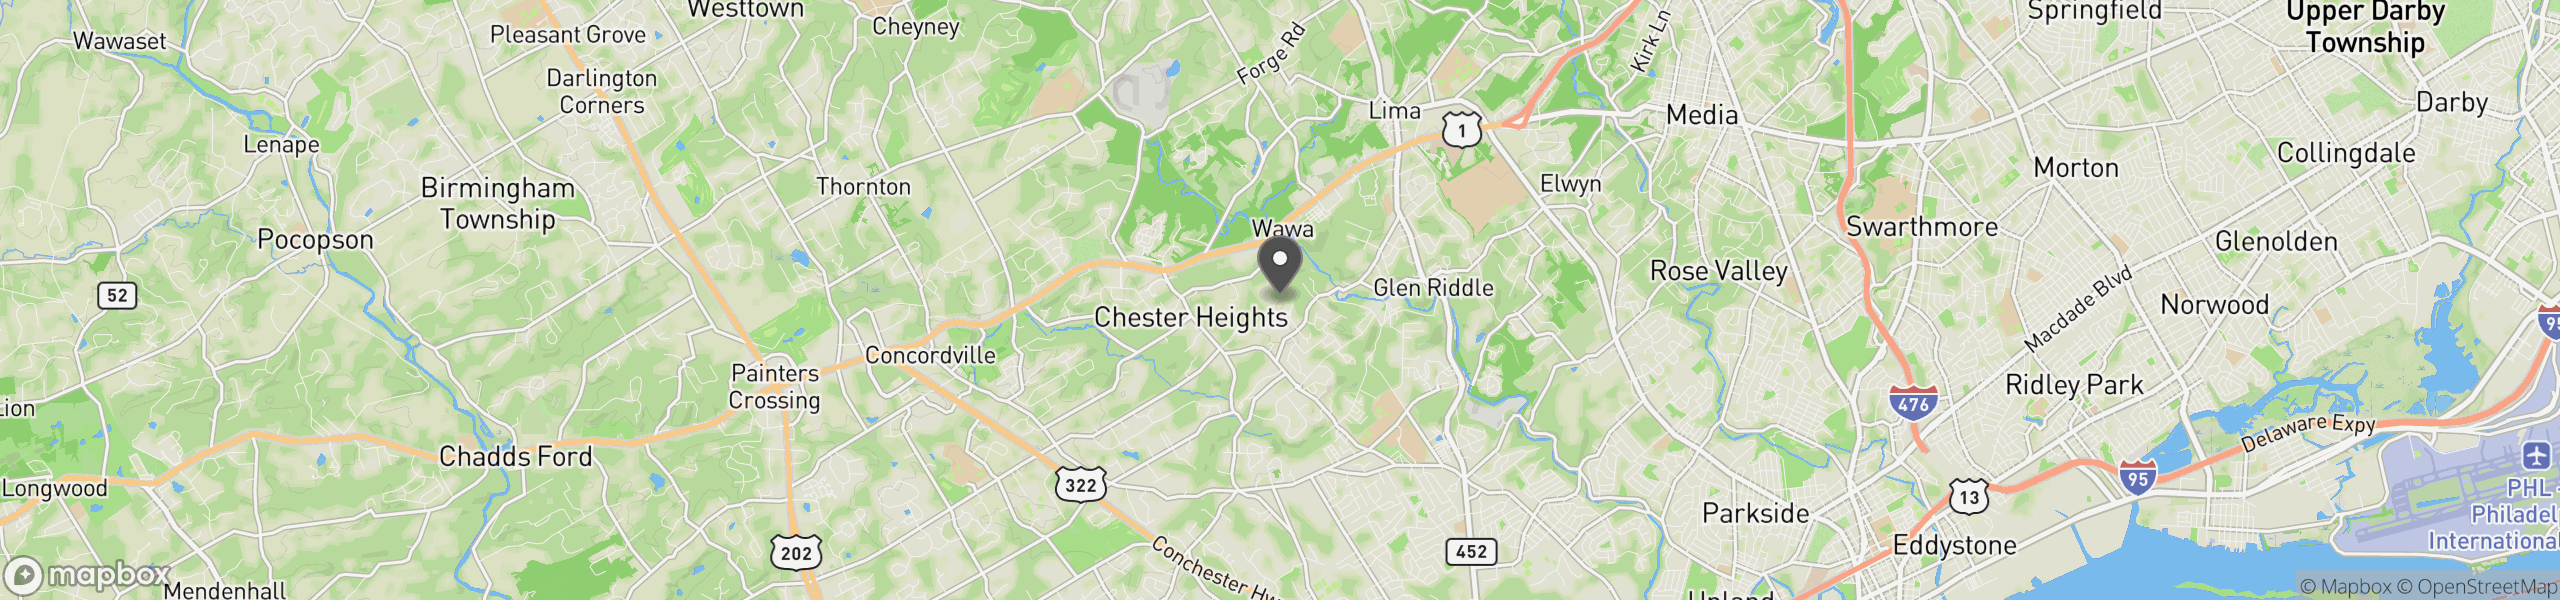 Chester Heights, PA